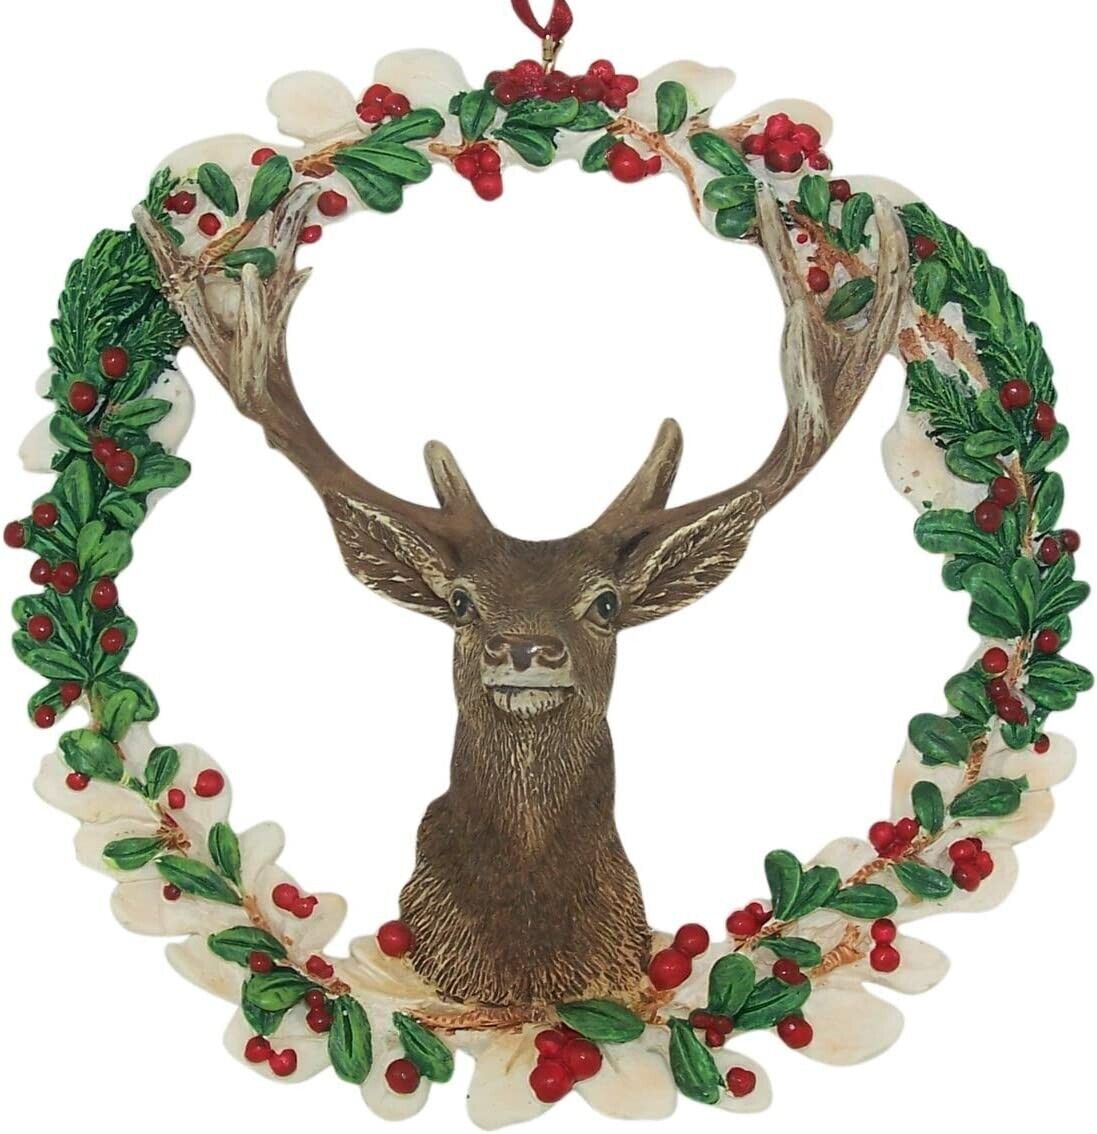 Cast Resin Buck Deer with Wreath Hanging Christmas Tree Ornament, 4 1/4 Inch